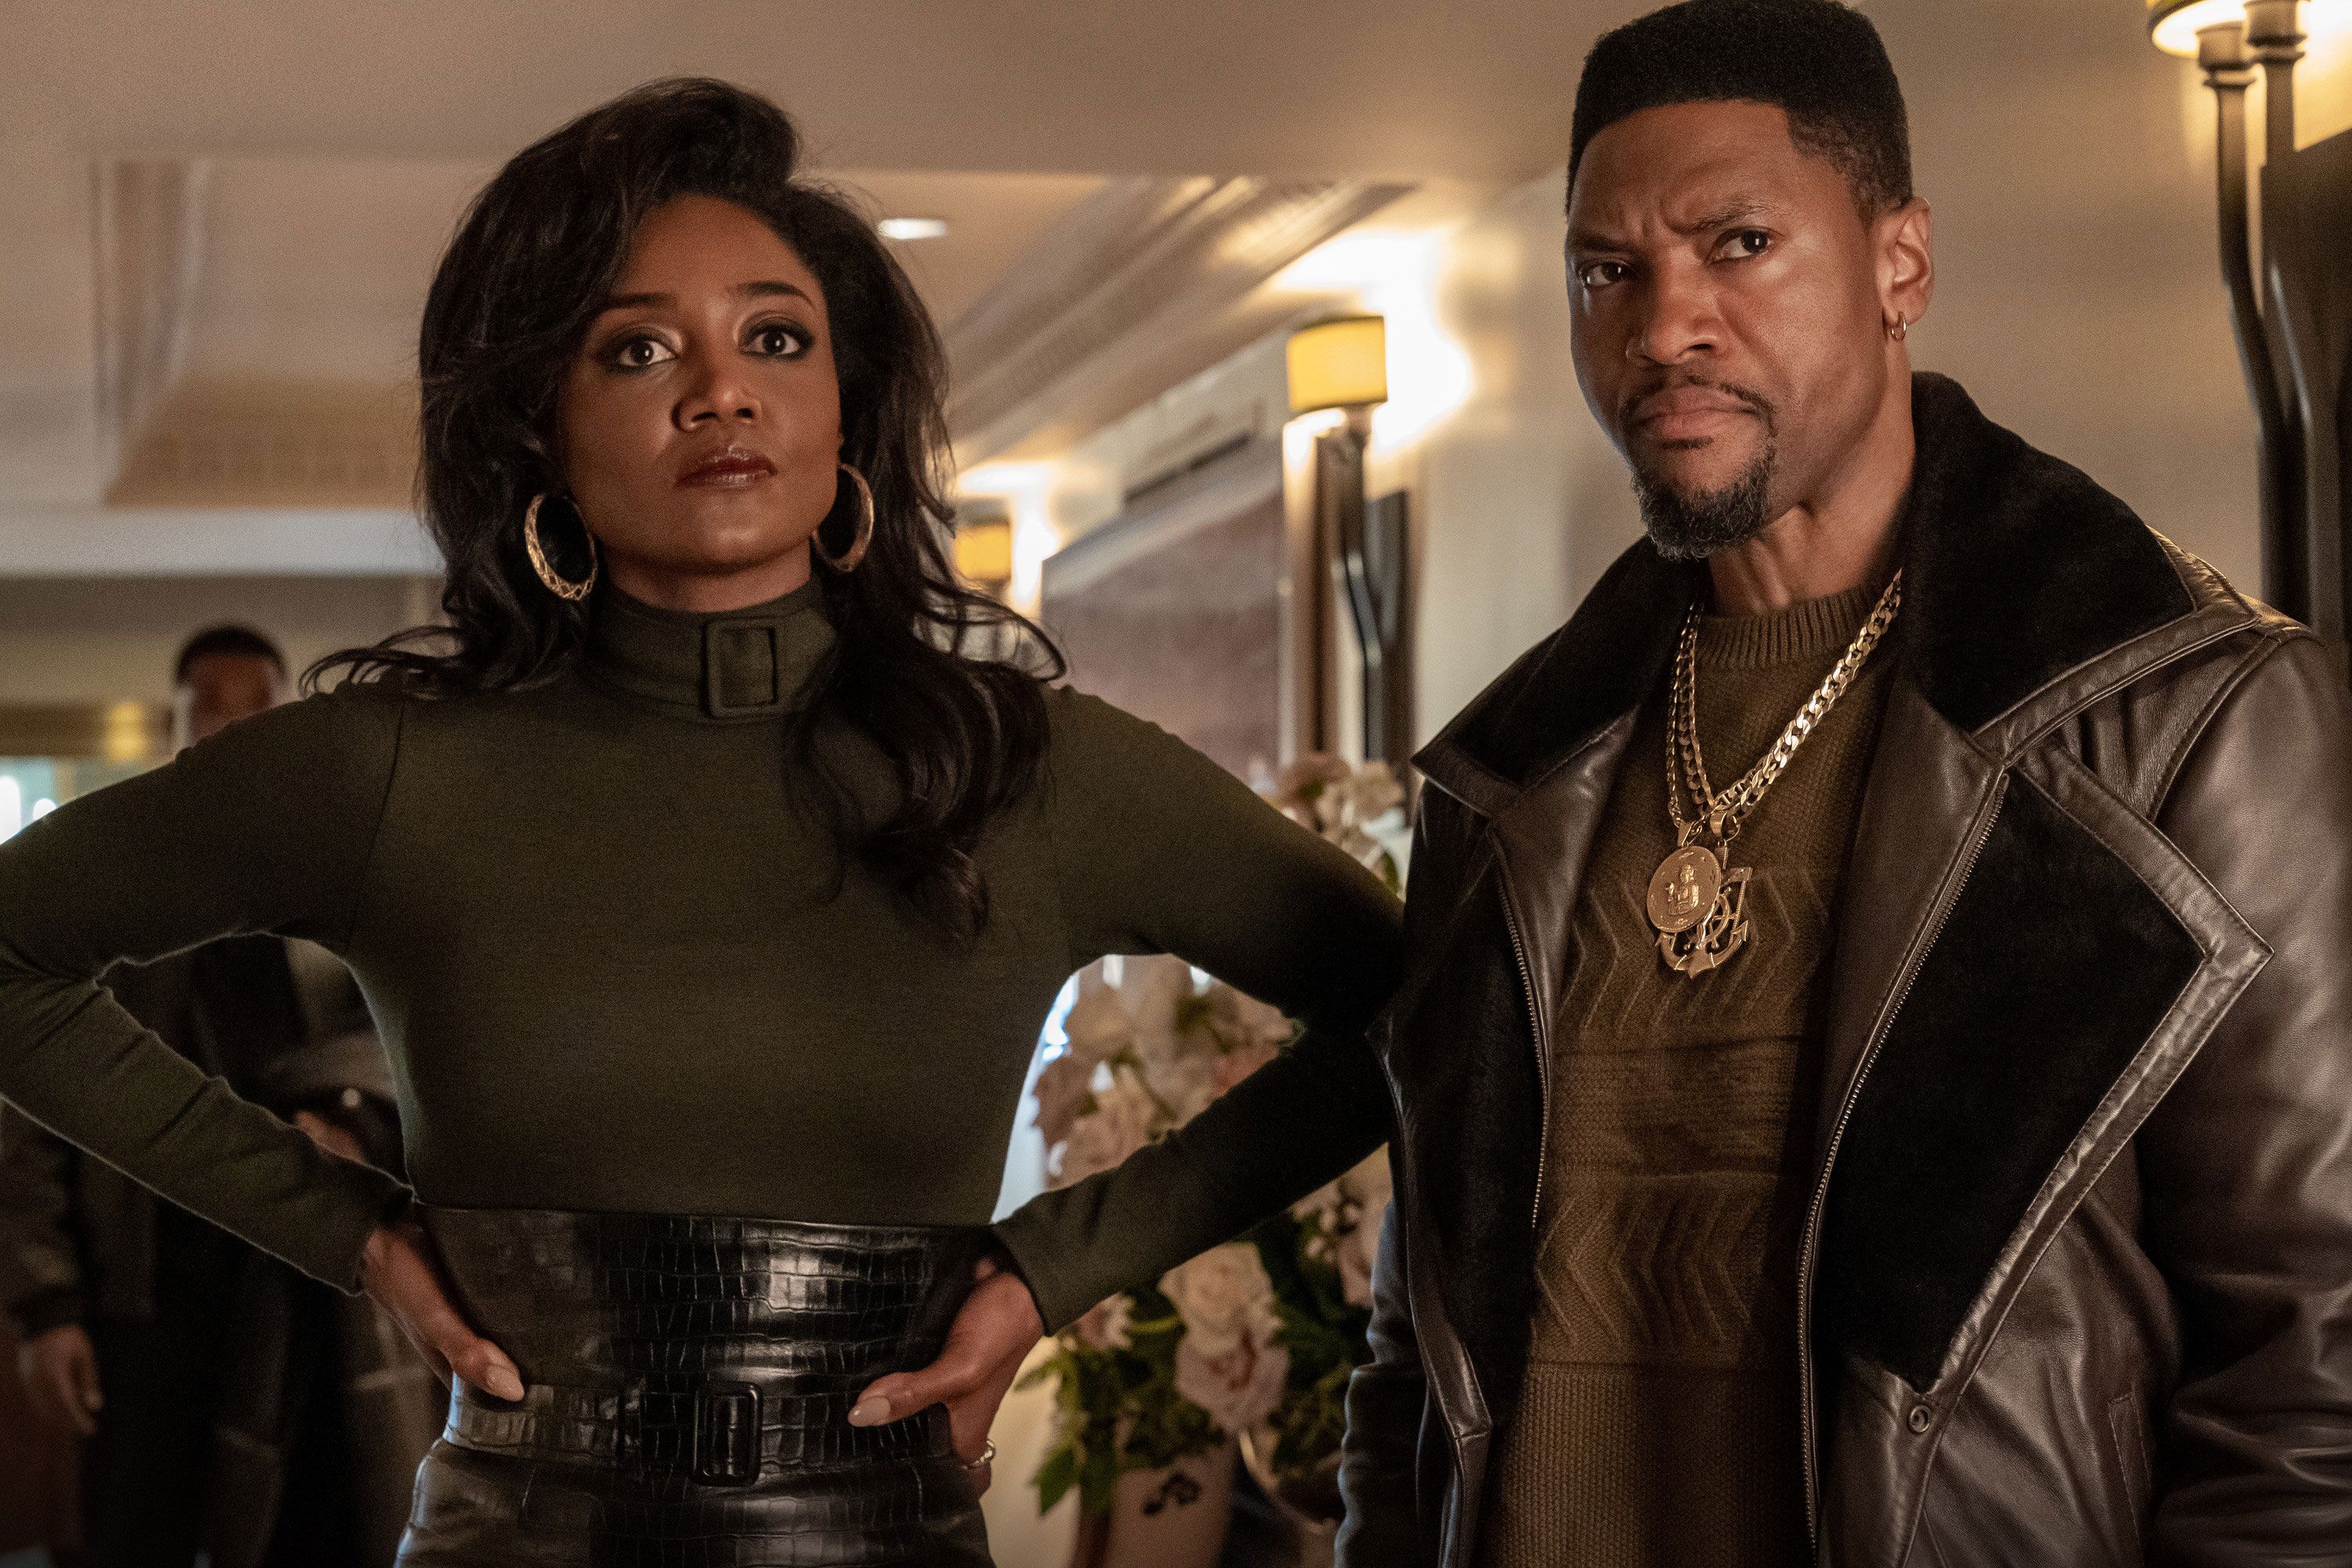 Power Book II: Ghost season 3 episode 10 (finale) release date, air time,  plot, and more